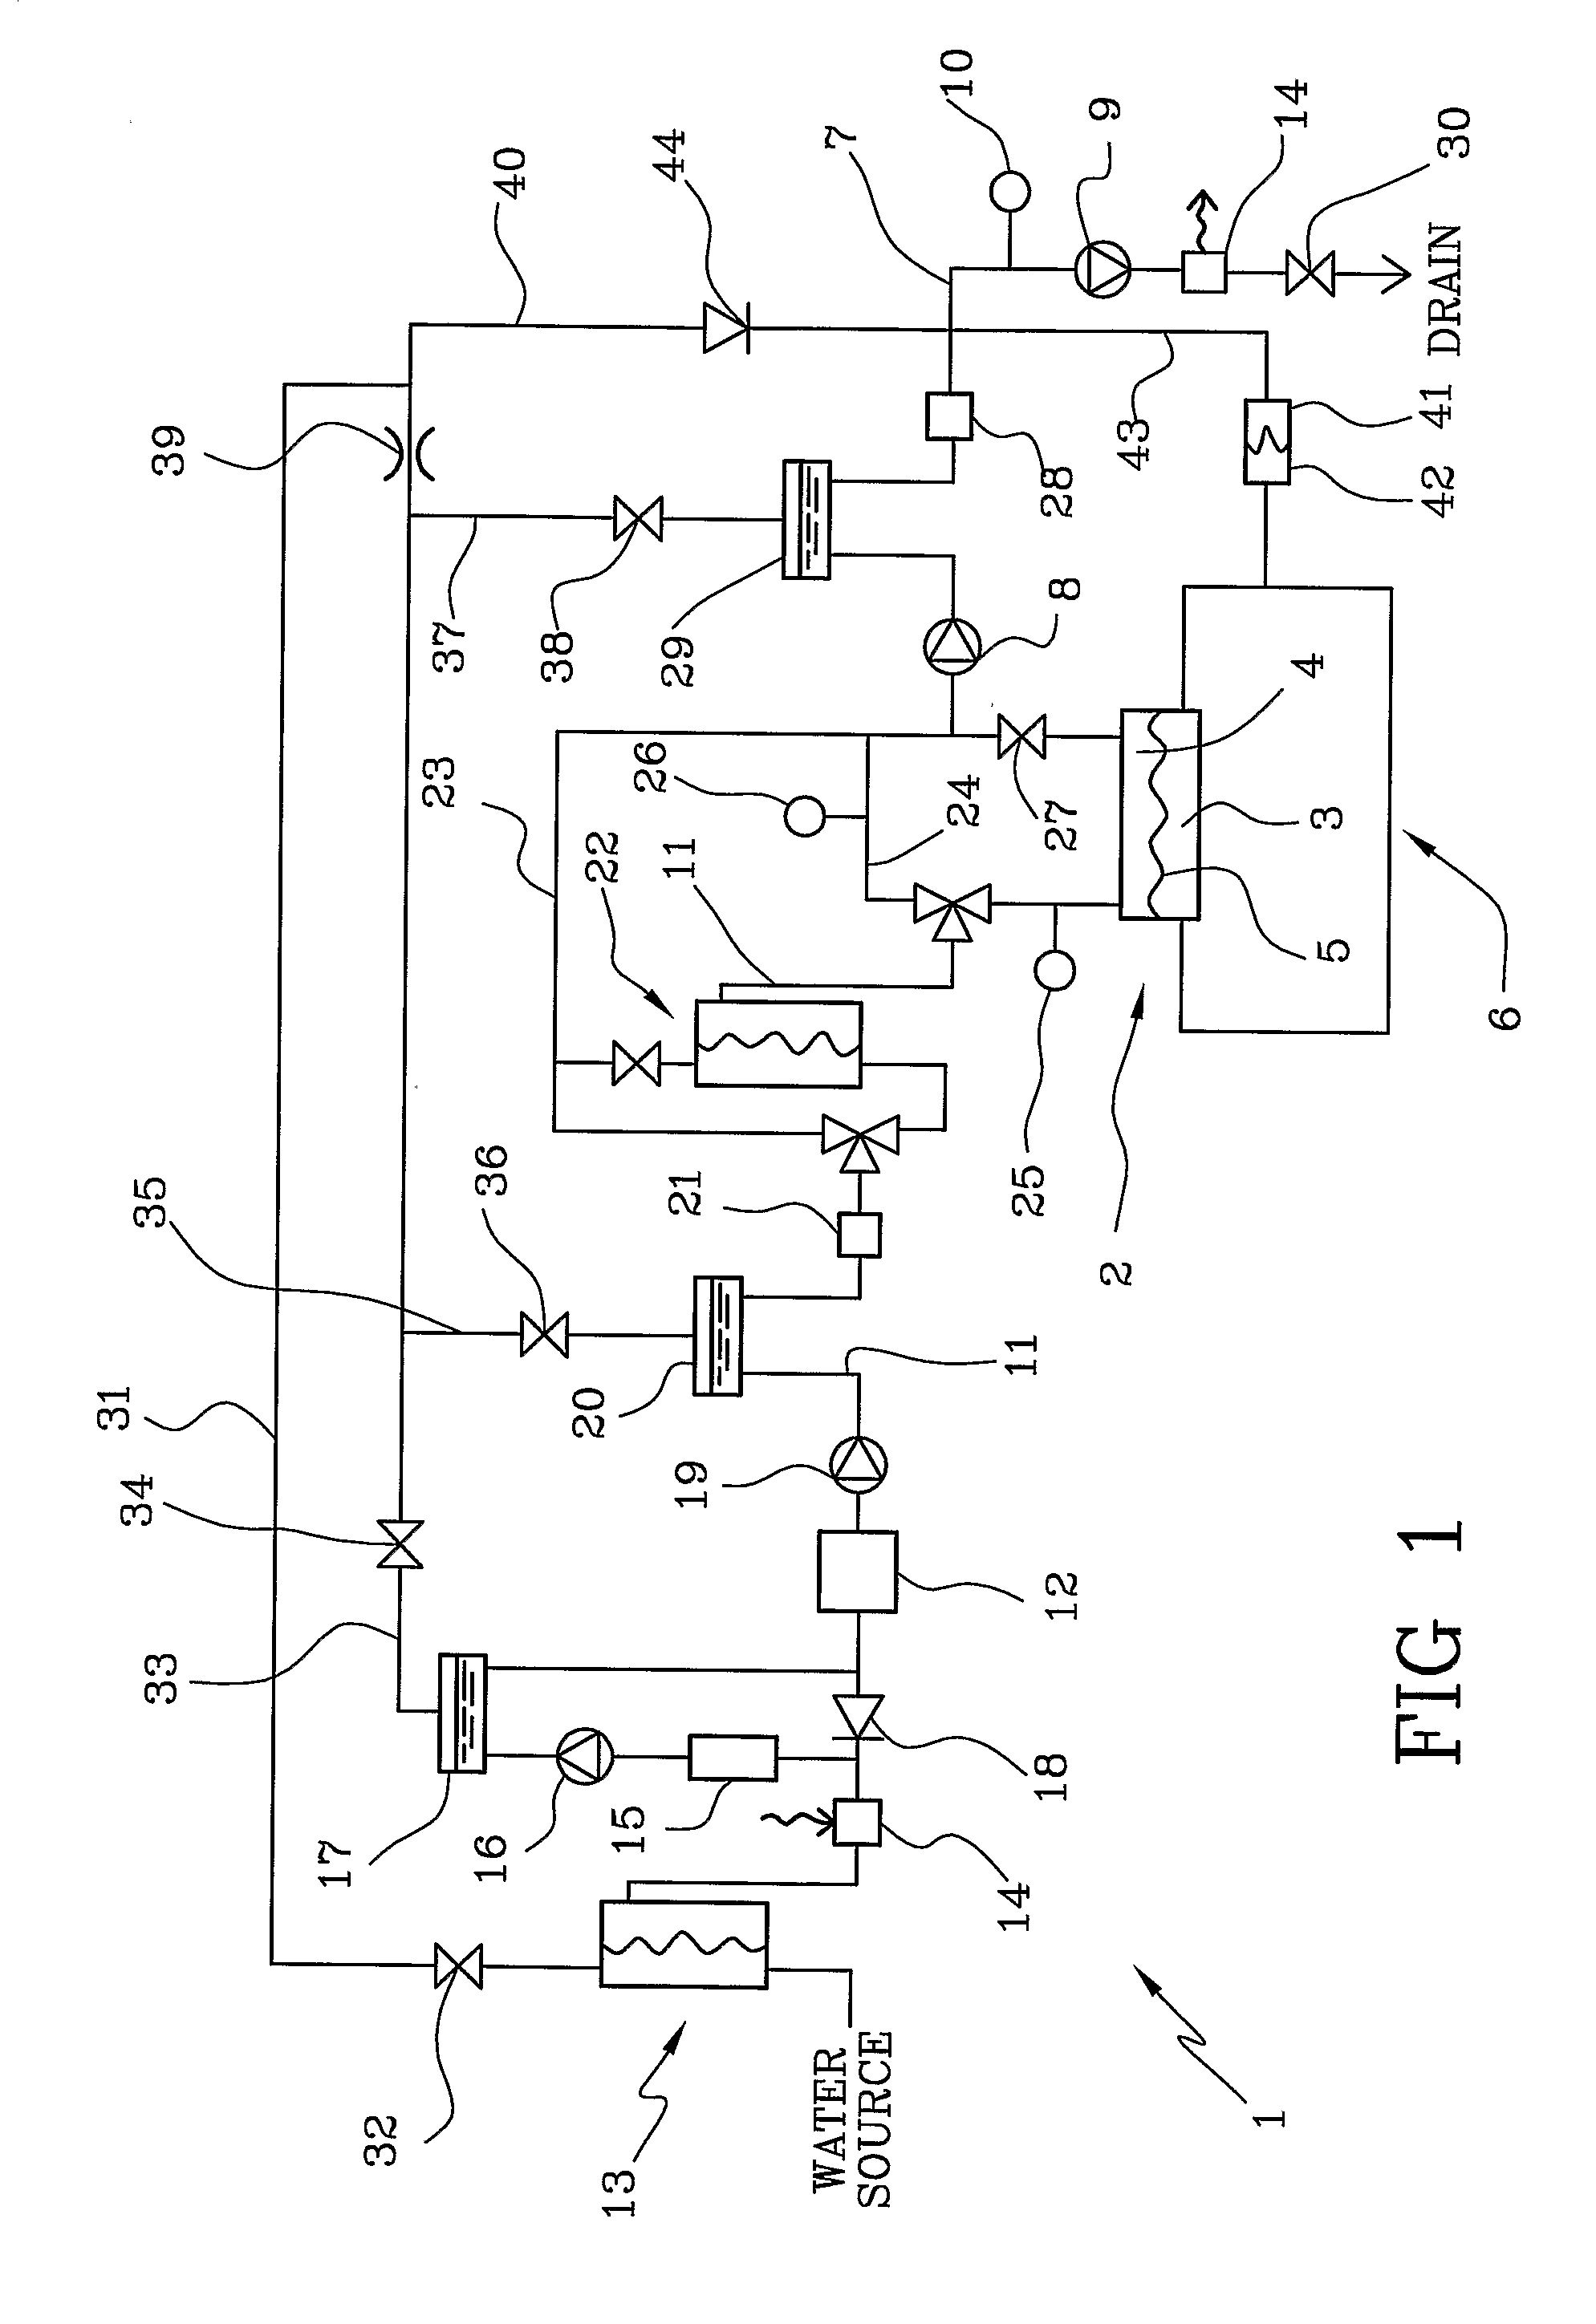 Apparatus for extracorporeal blood treatment